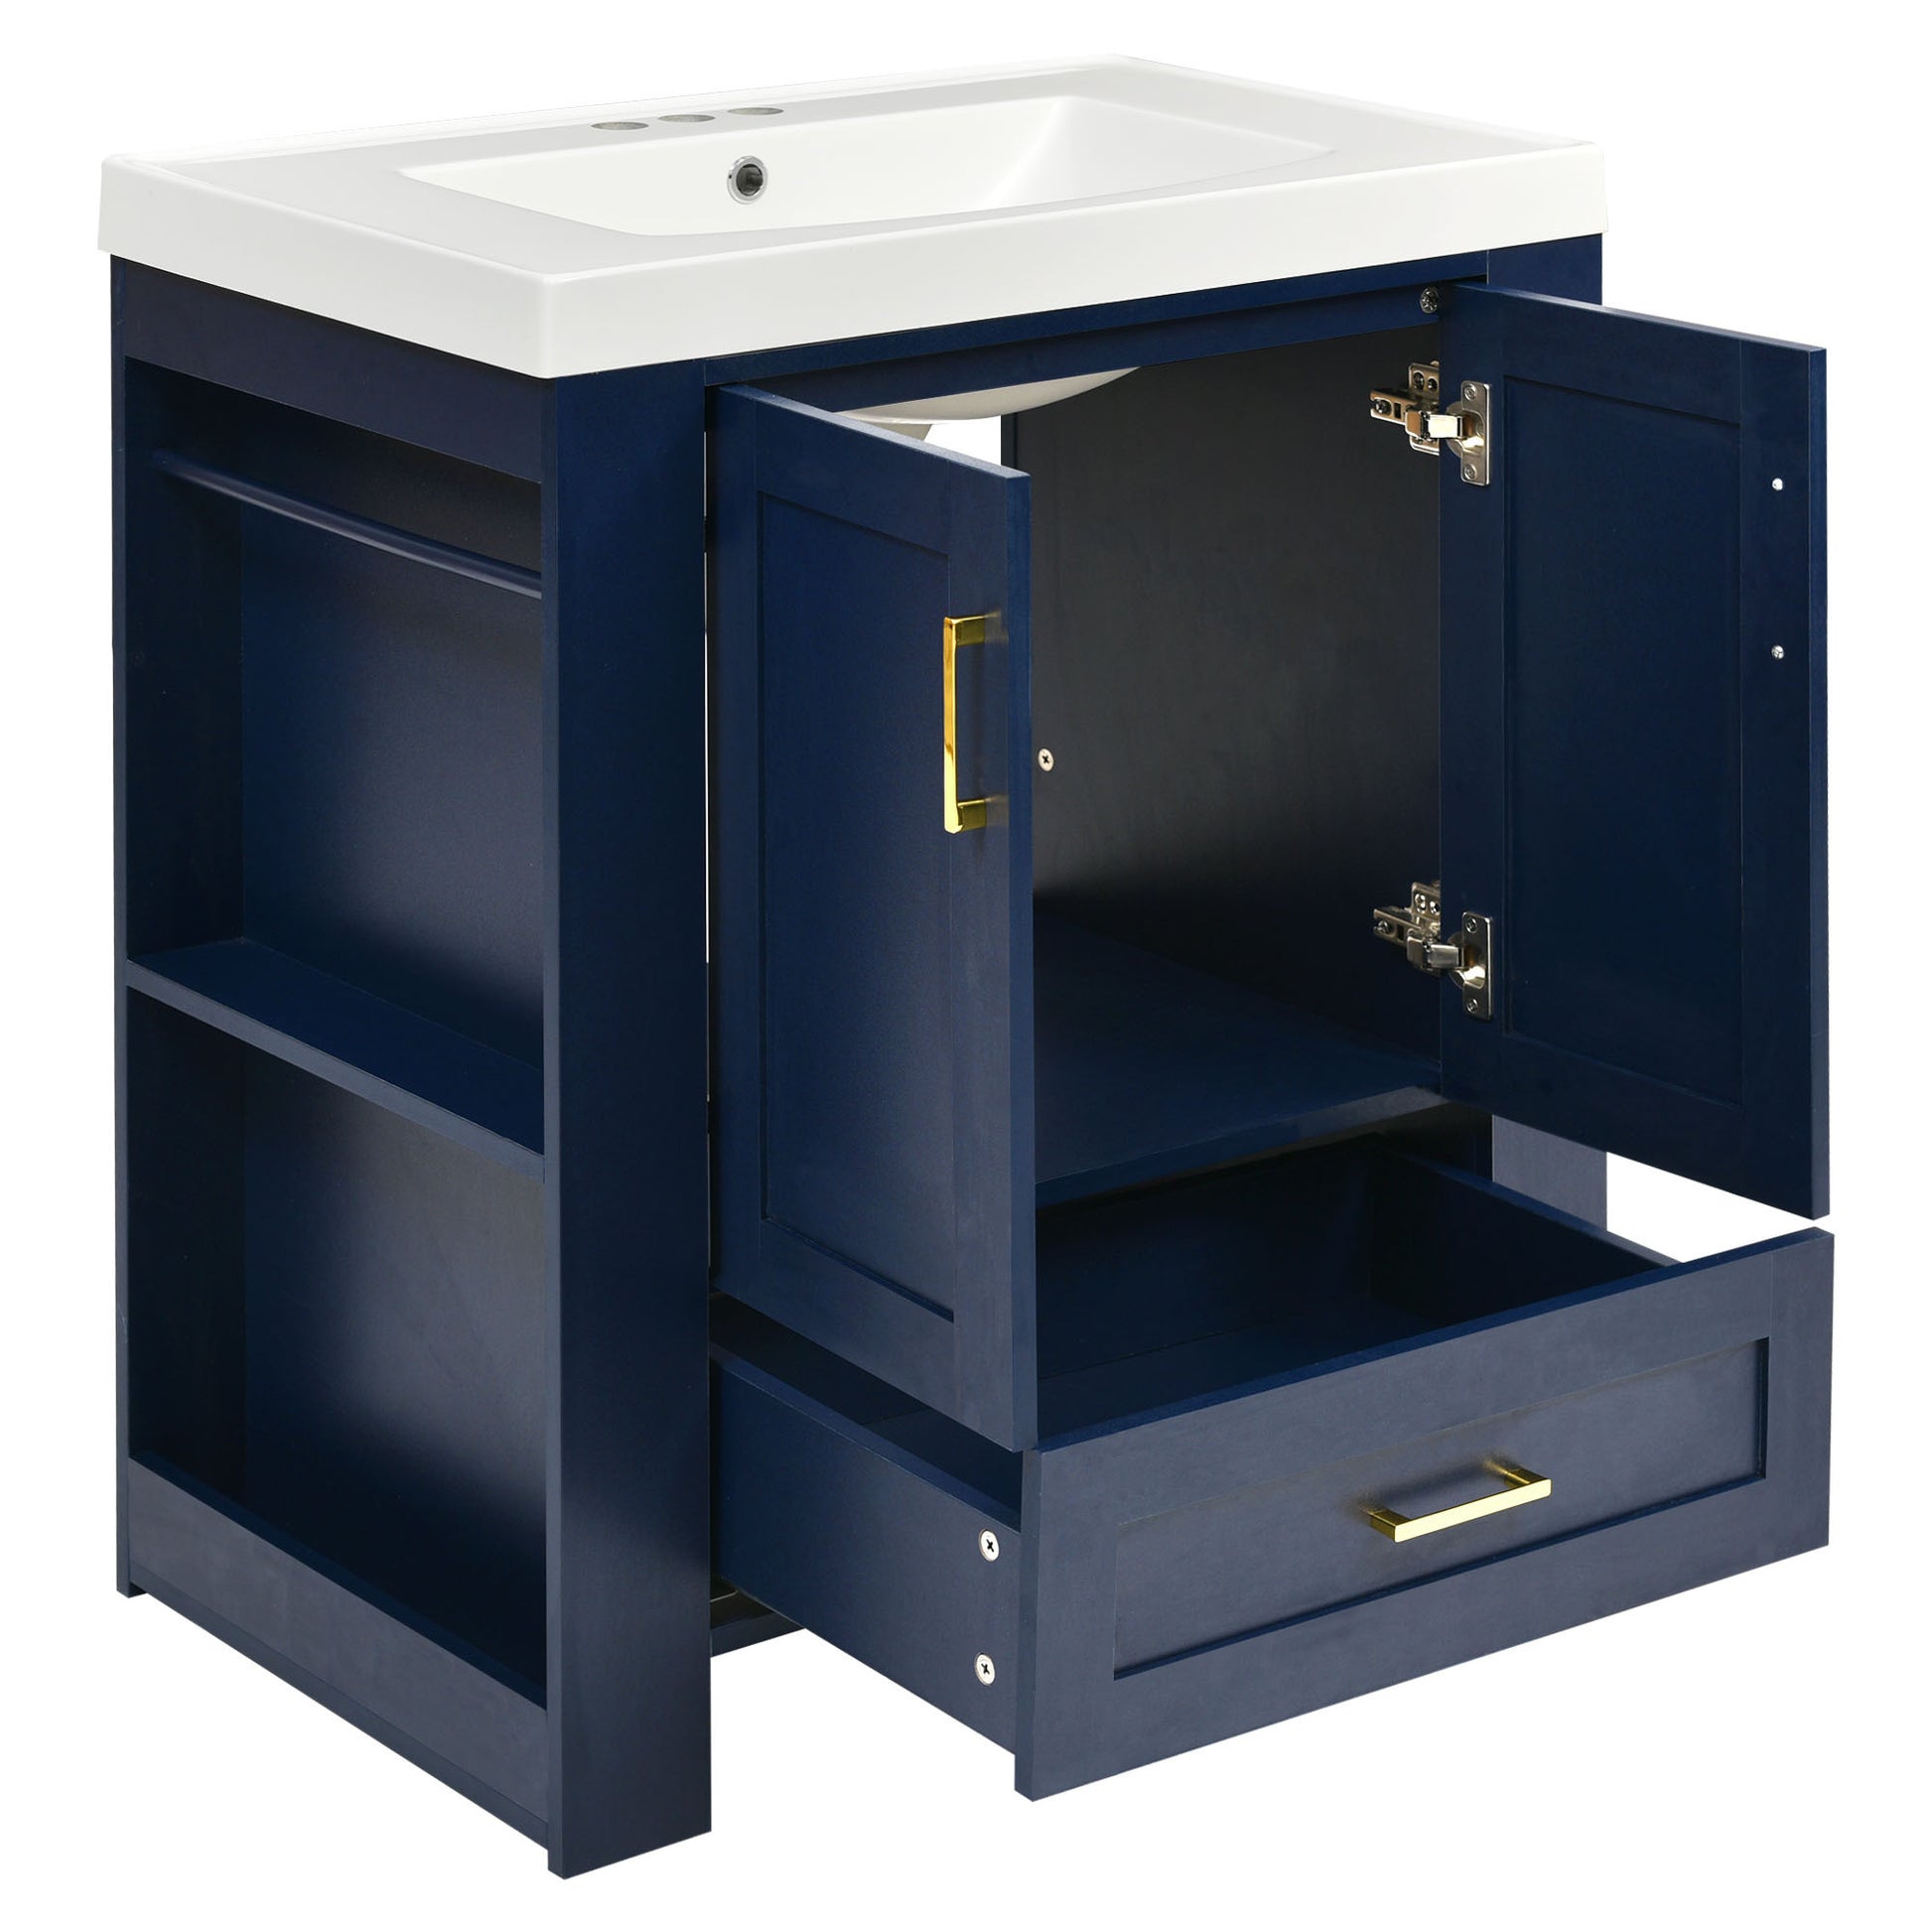 30'' Bathroom Vanity with Seperate Basin Sink, Modern 1-blue-2-3-24 to 31 in-soft close